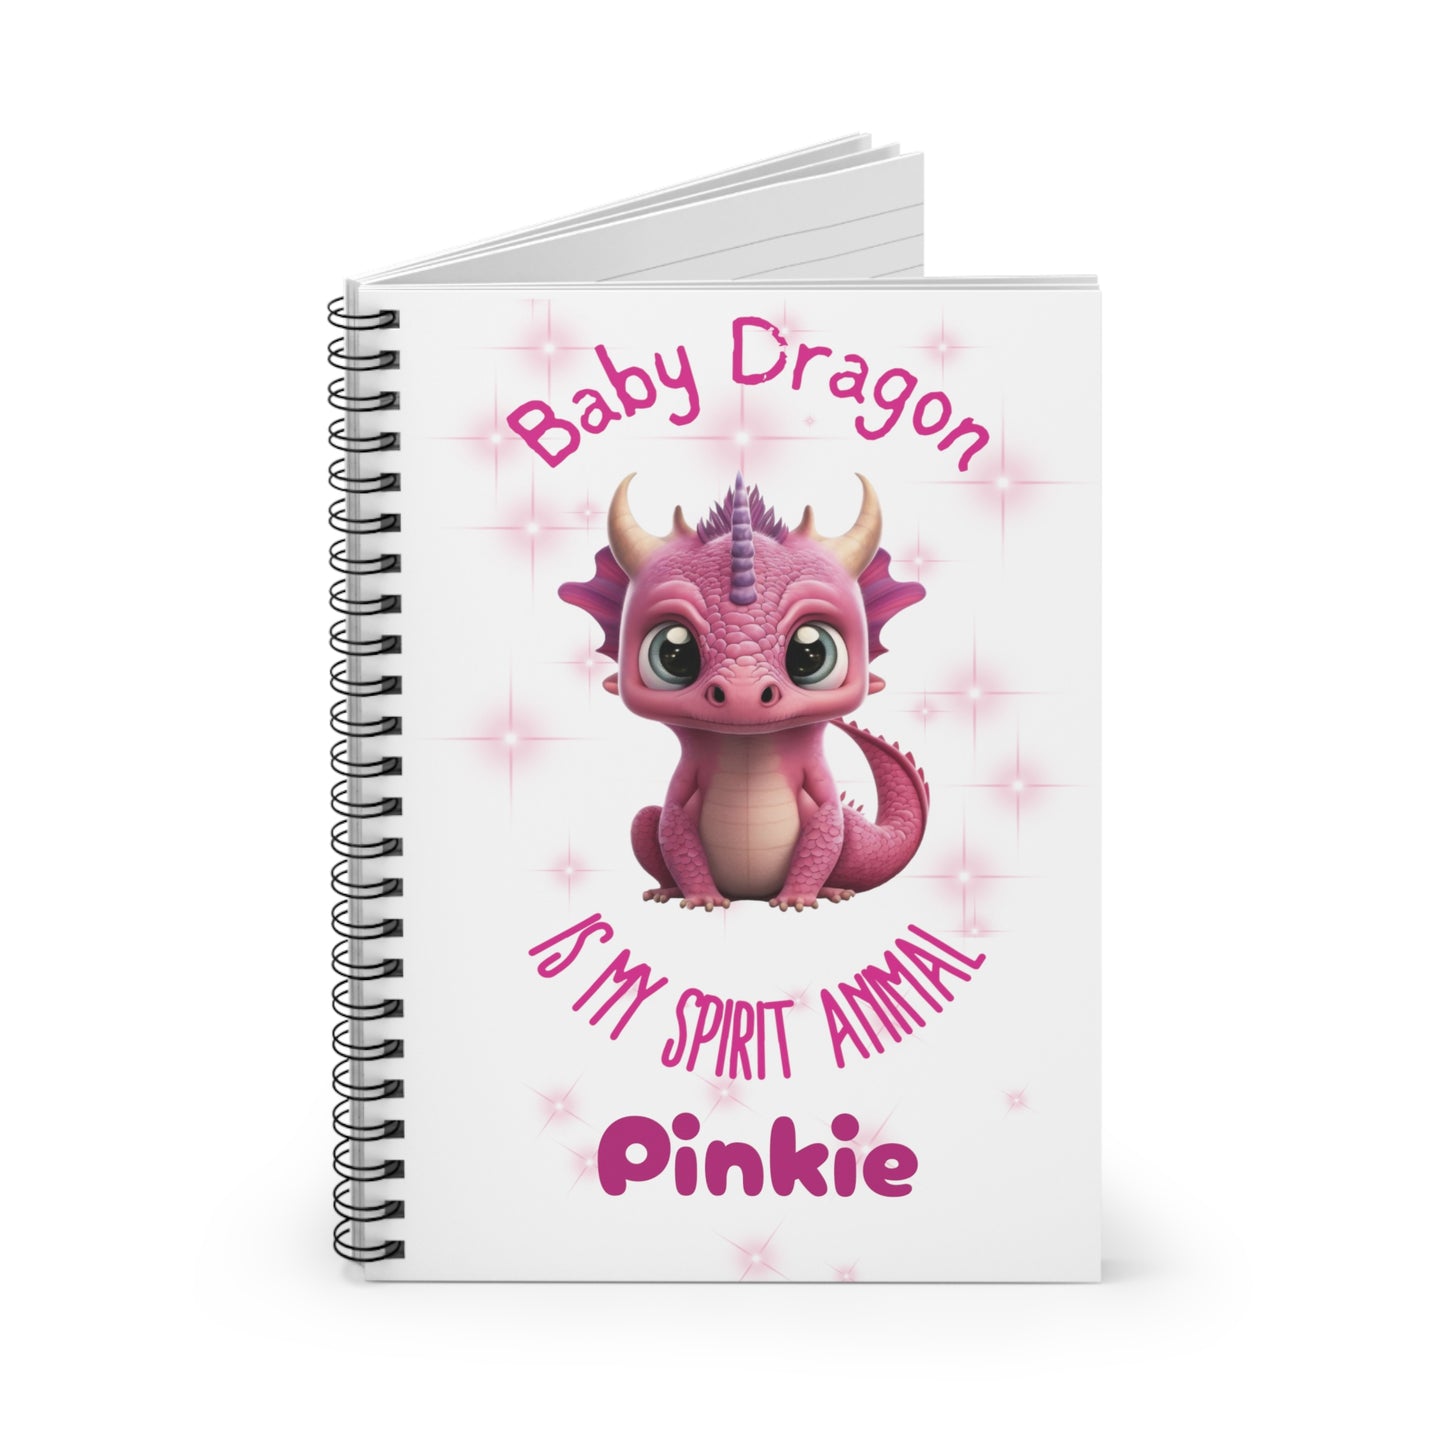 Baby Dragon Pinkie Is My Spirit Animal Spiral Notebook - Ruled Line - Mothers Day